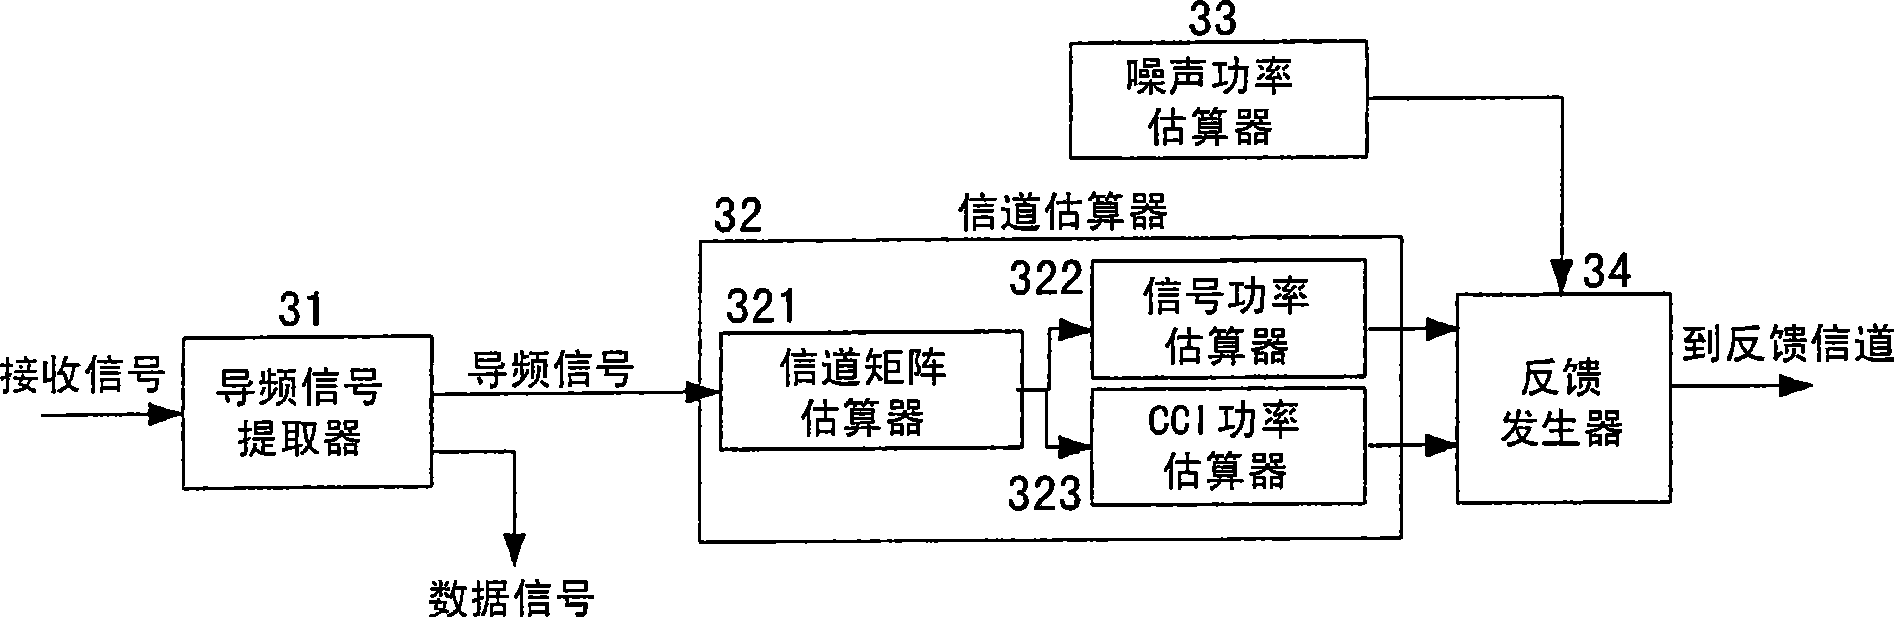 Scheduling method and apparatus based on user feedback in multi-user MIMO communication system